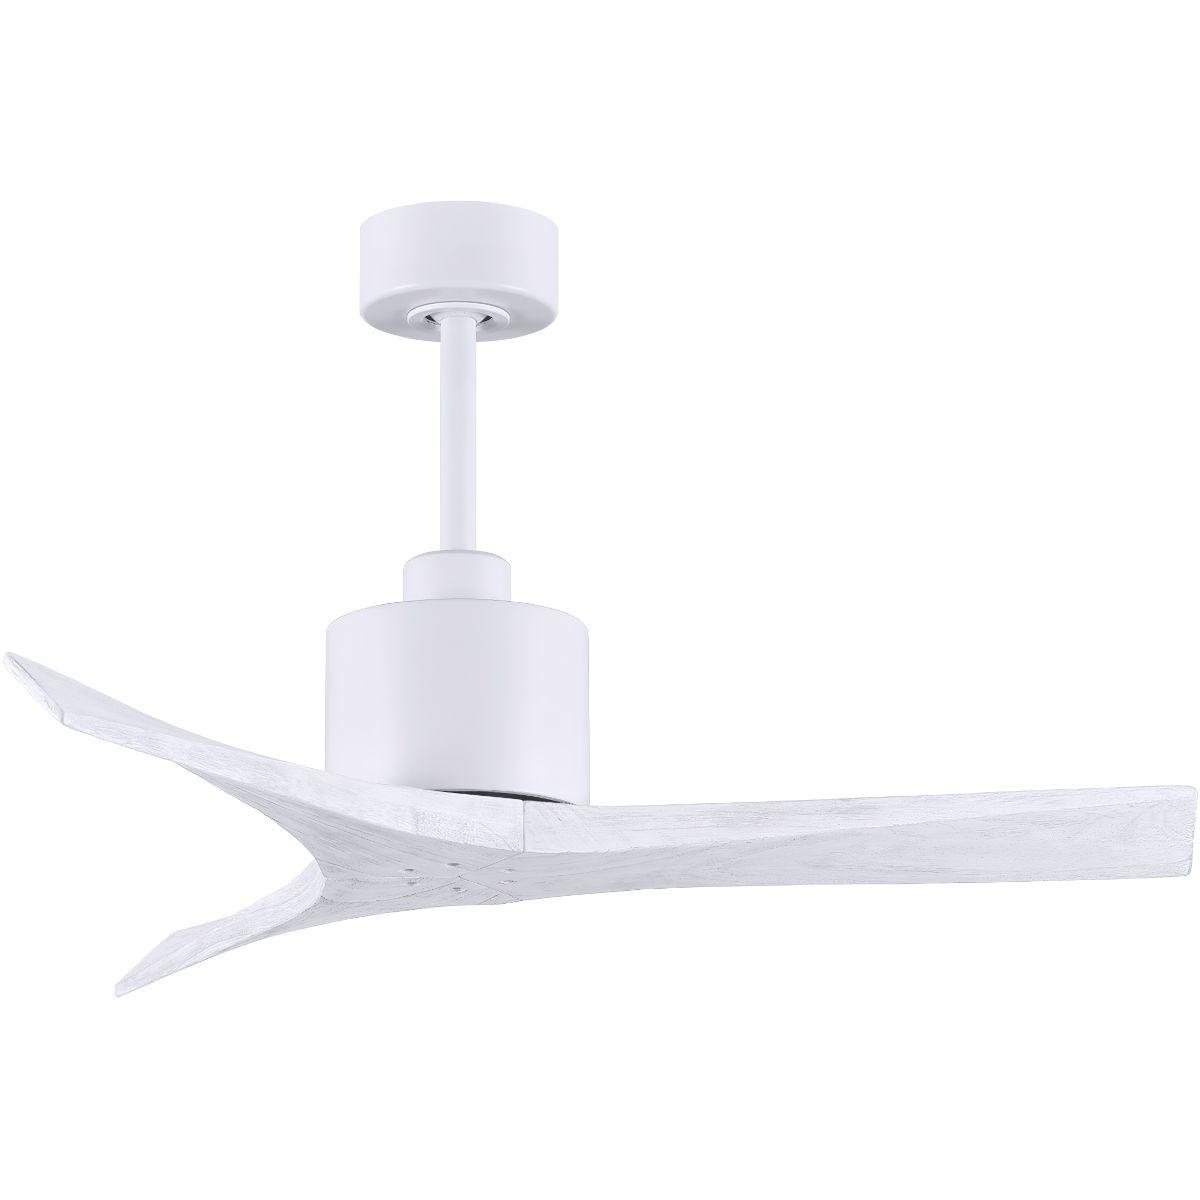 Mollywood 42 Inch Propeller Outdoor Ceiling Fan With Remote And Wall Control